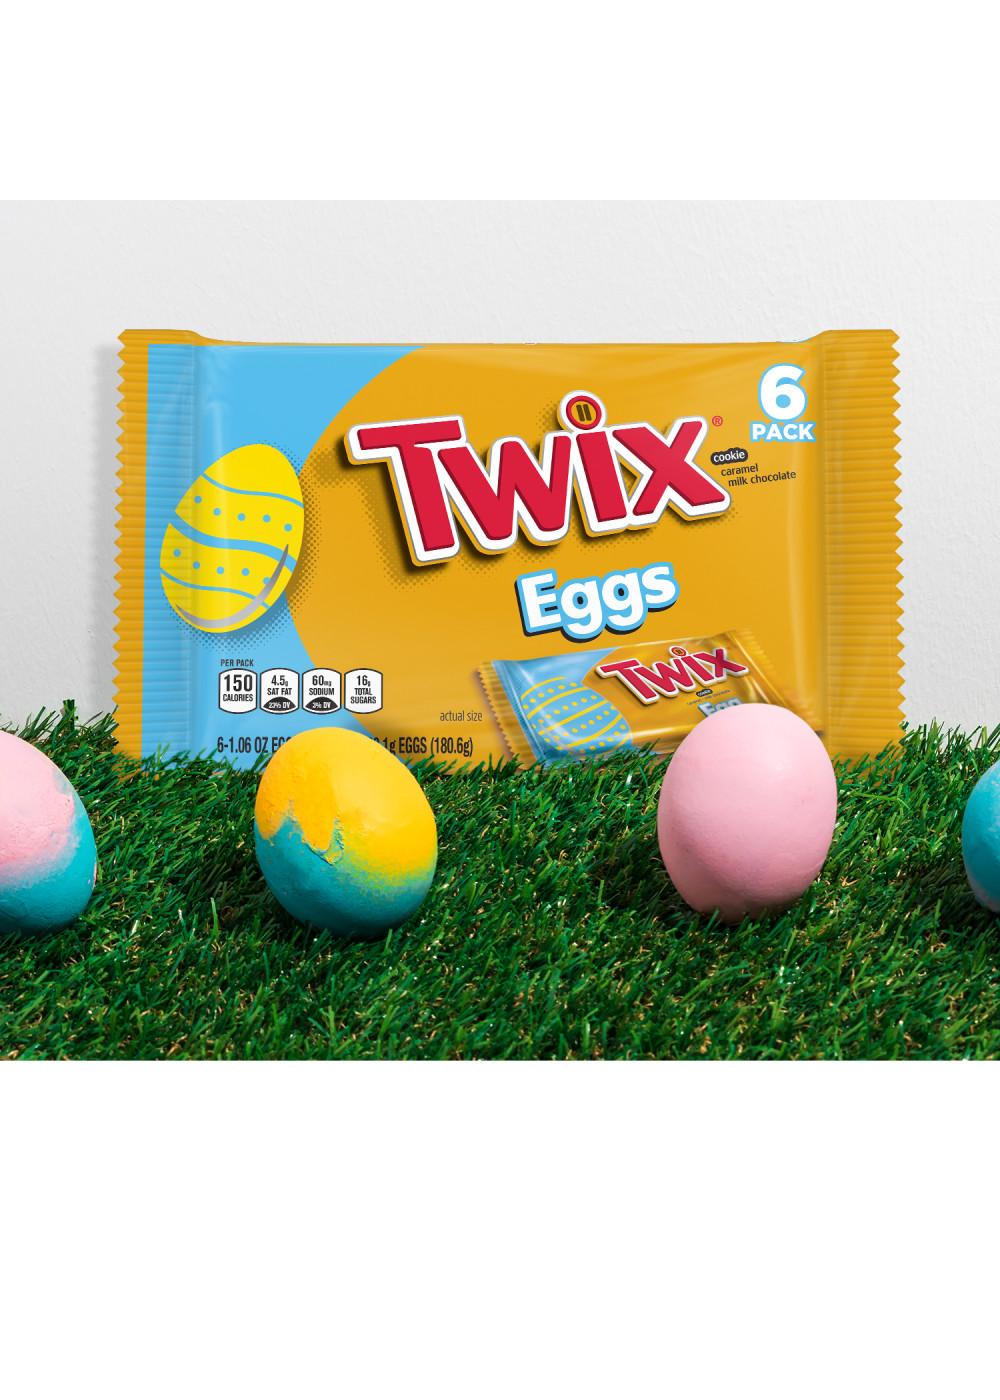 Twix Eggs Easter Candy; image 5 of 8